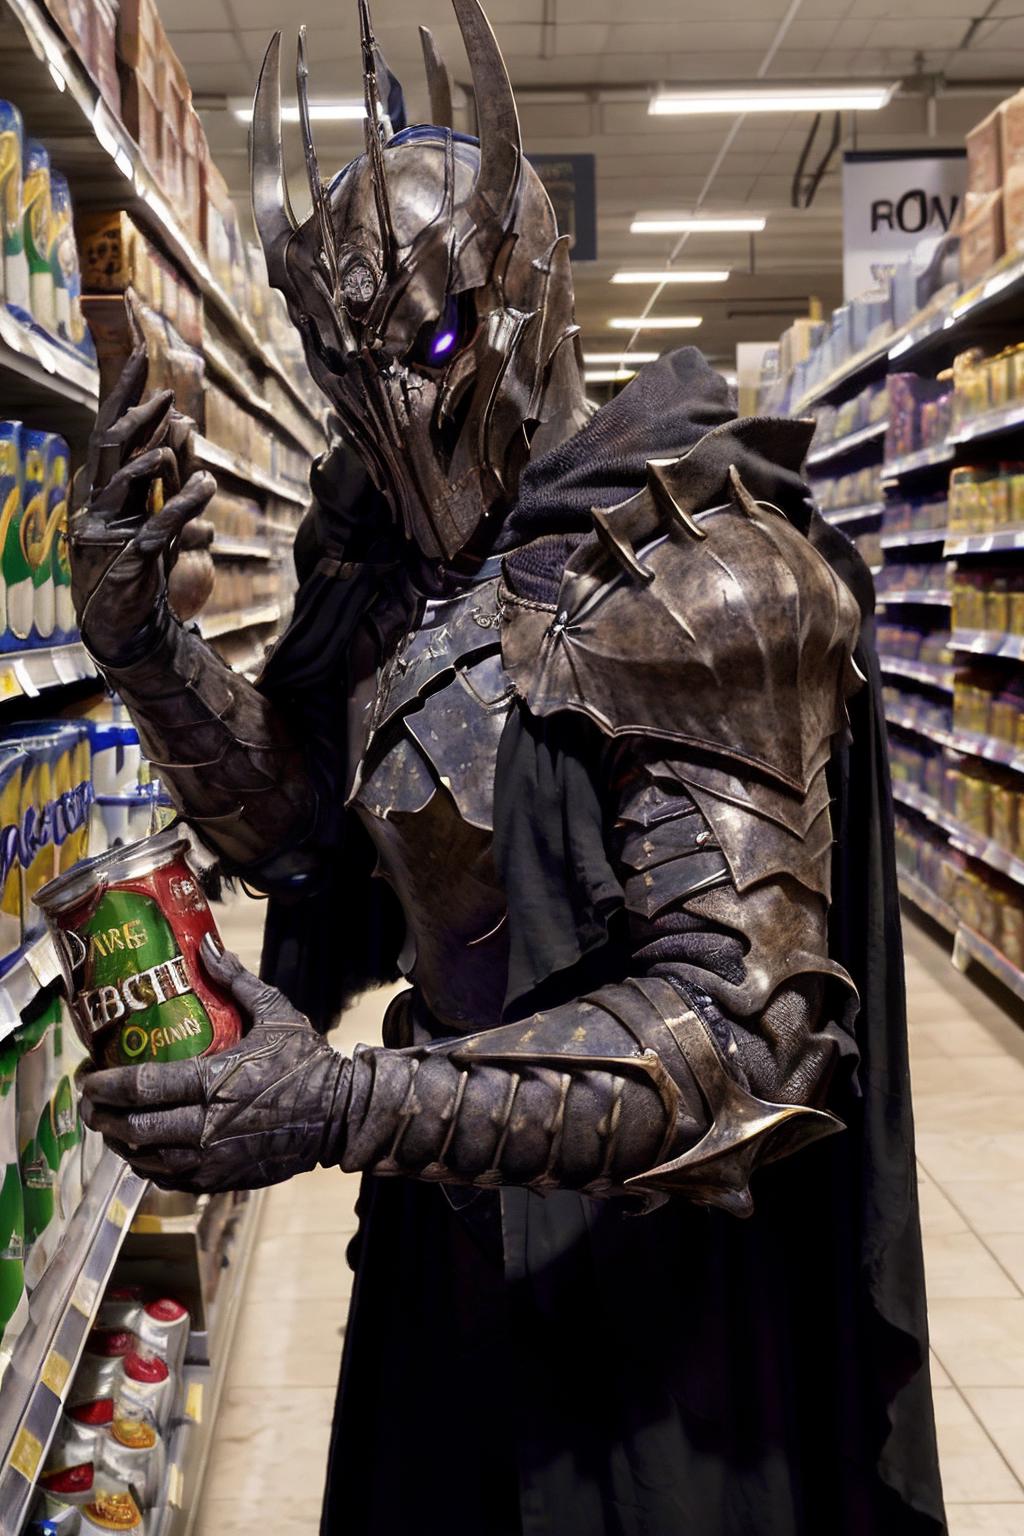 A man in a costume holding a can of Daredevil soup in a grocery store aisle.